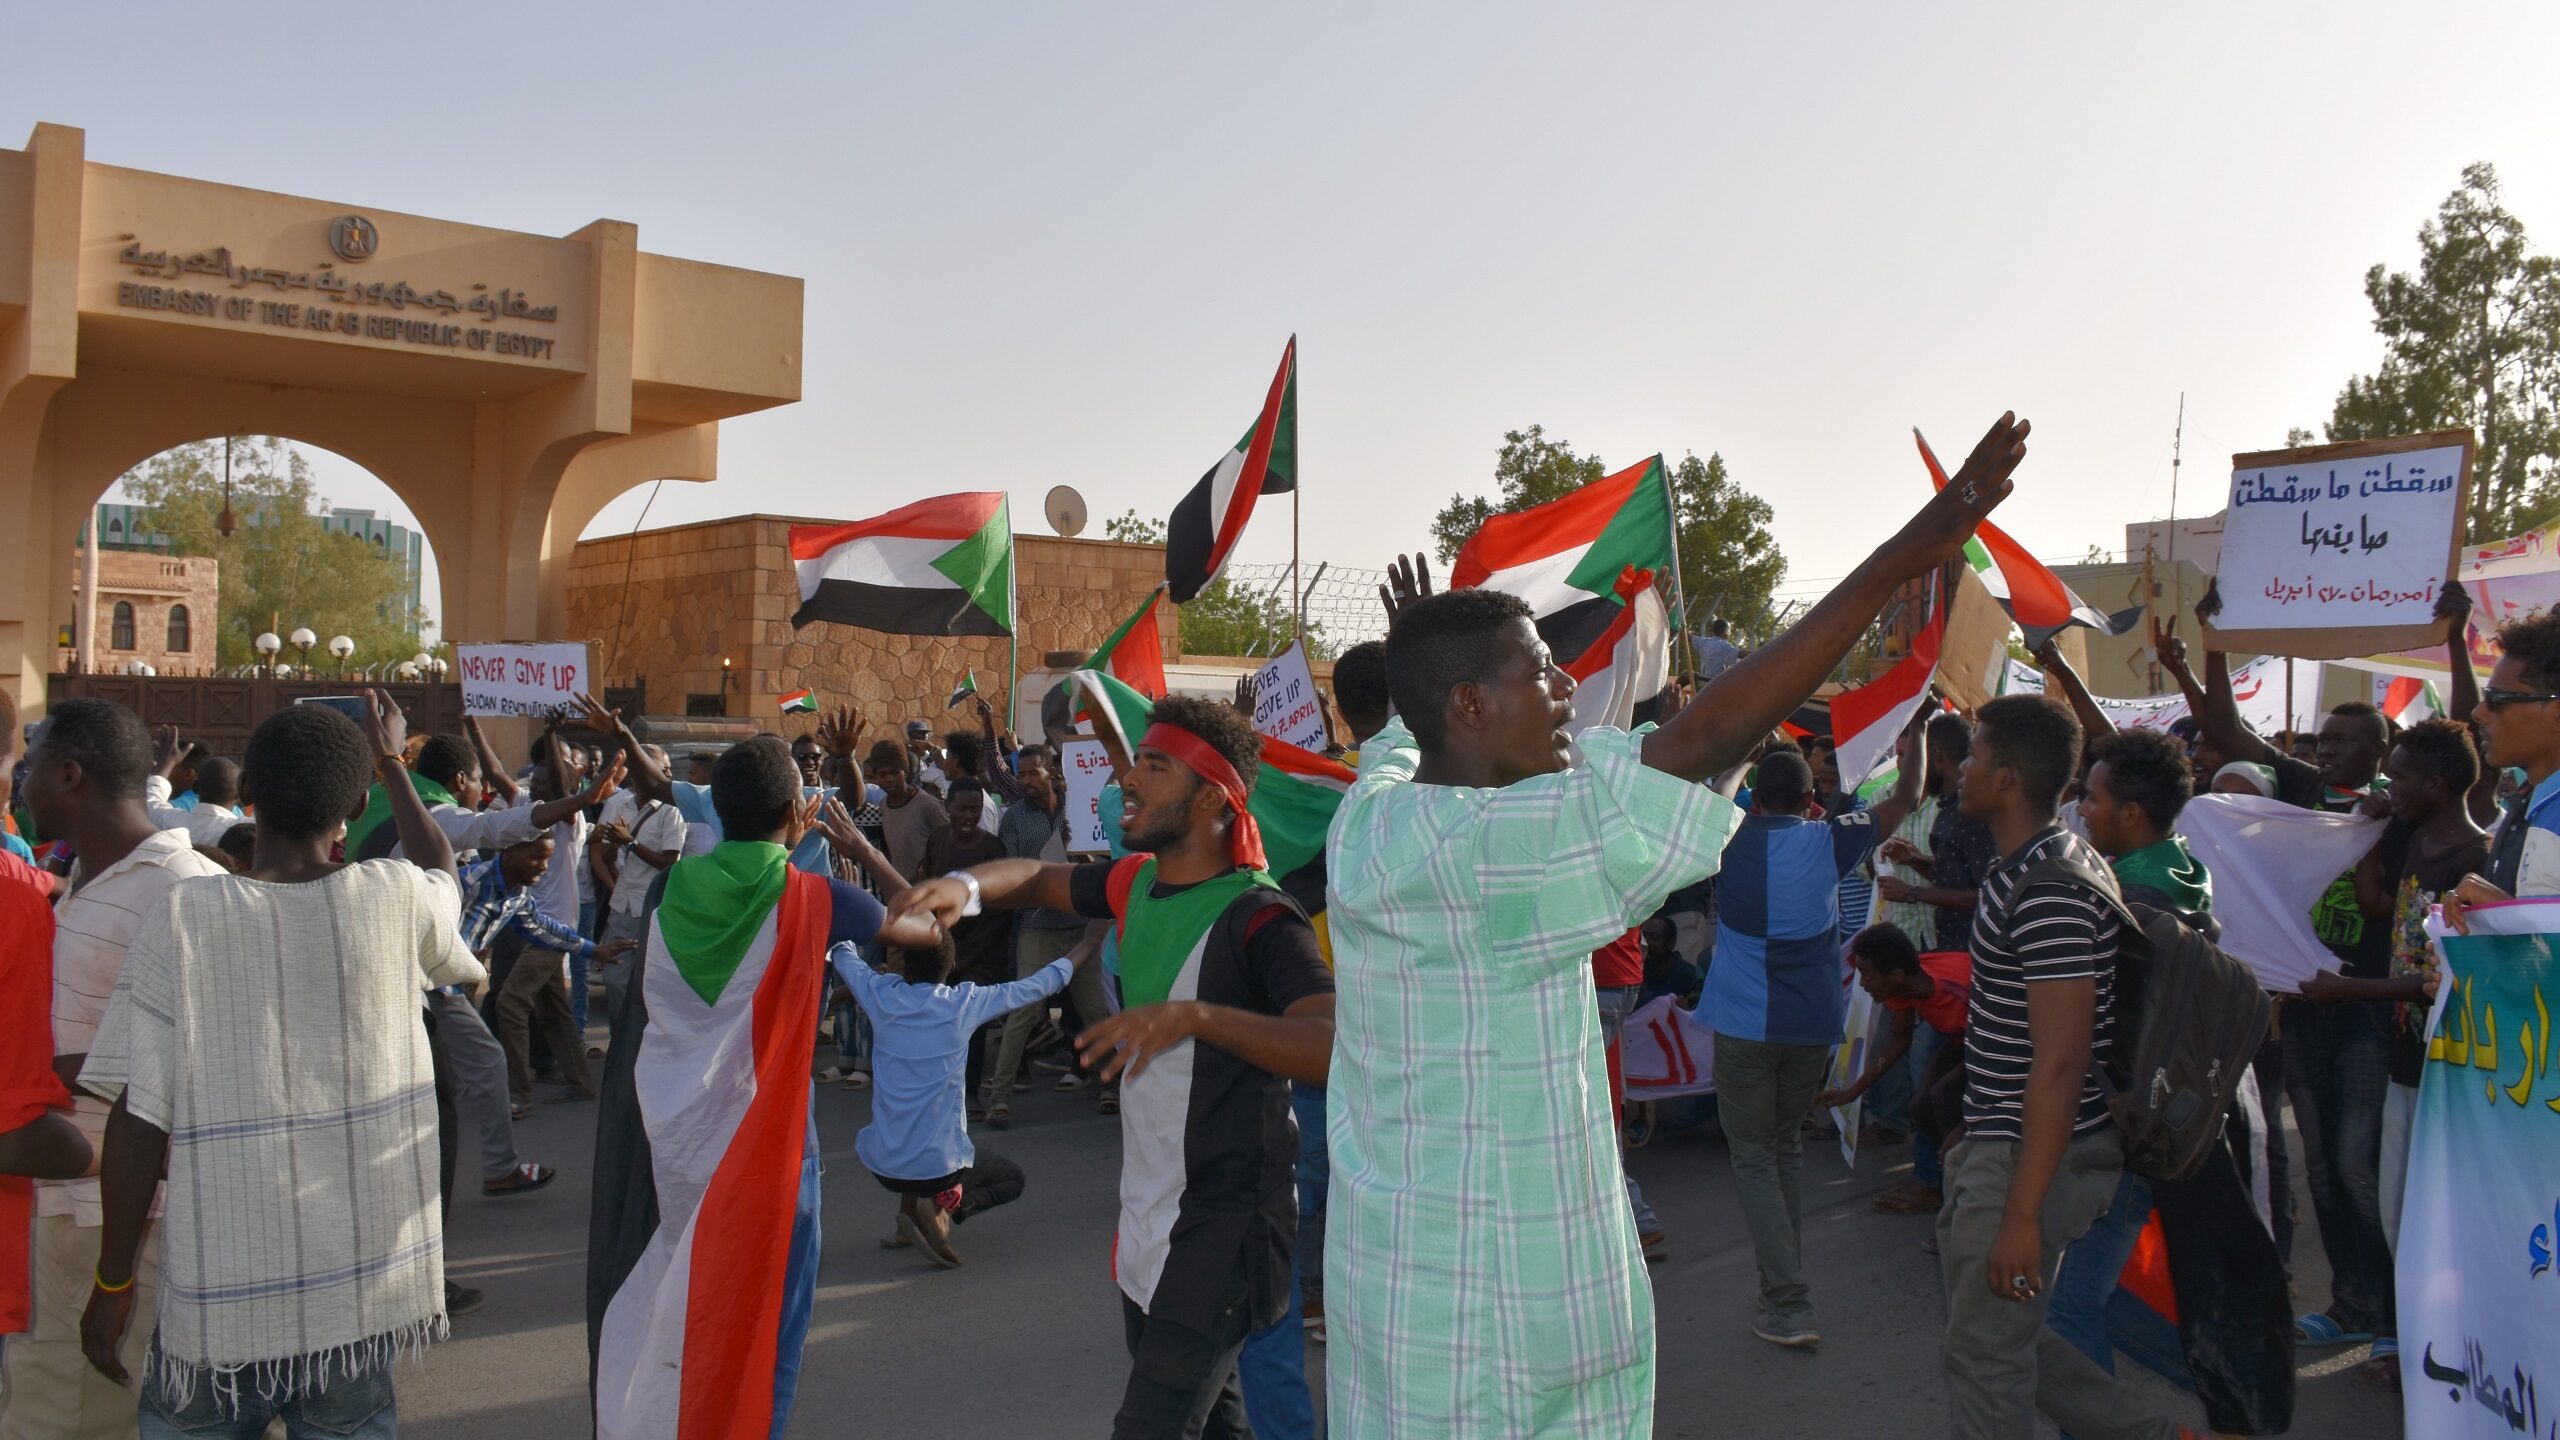 Egyptian Embassy Staff Member Injured in Sudan Clashes